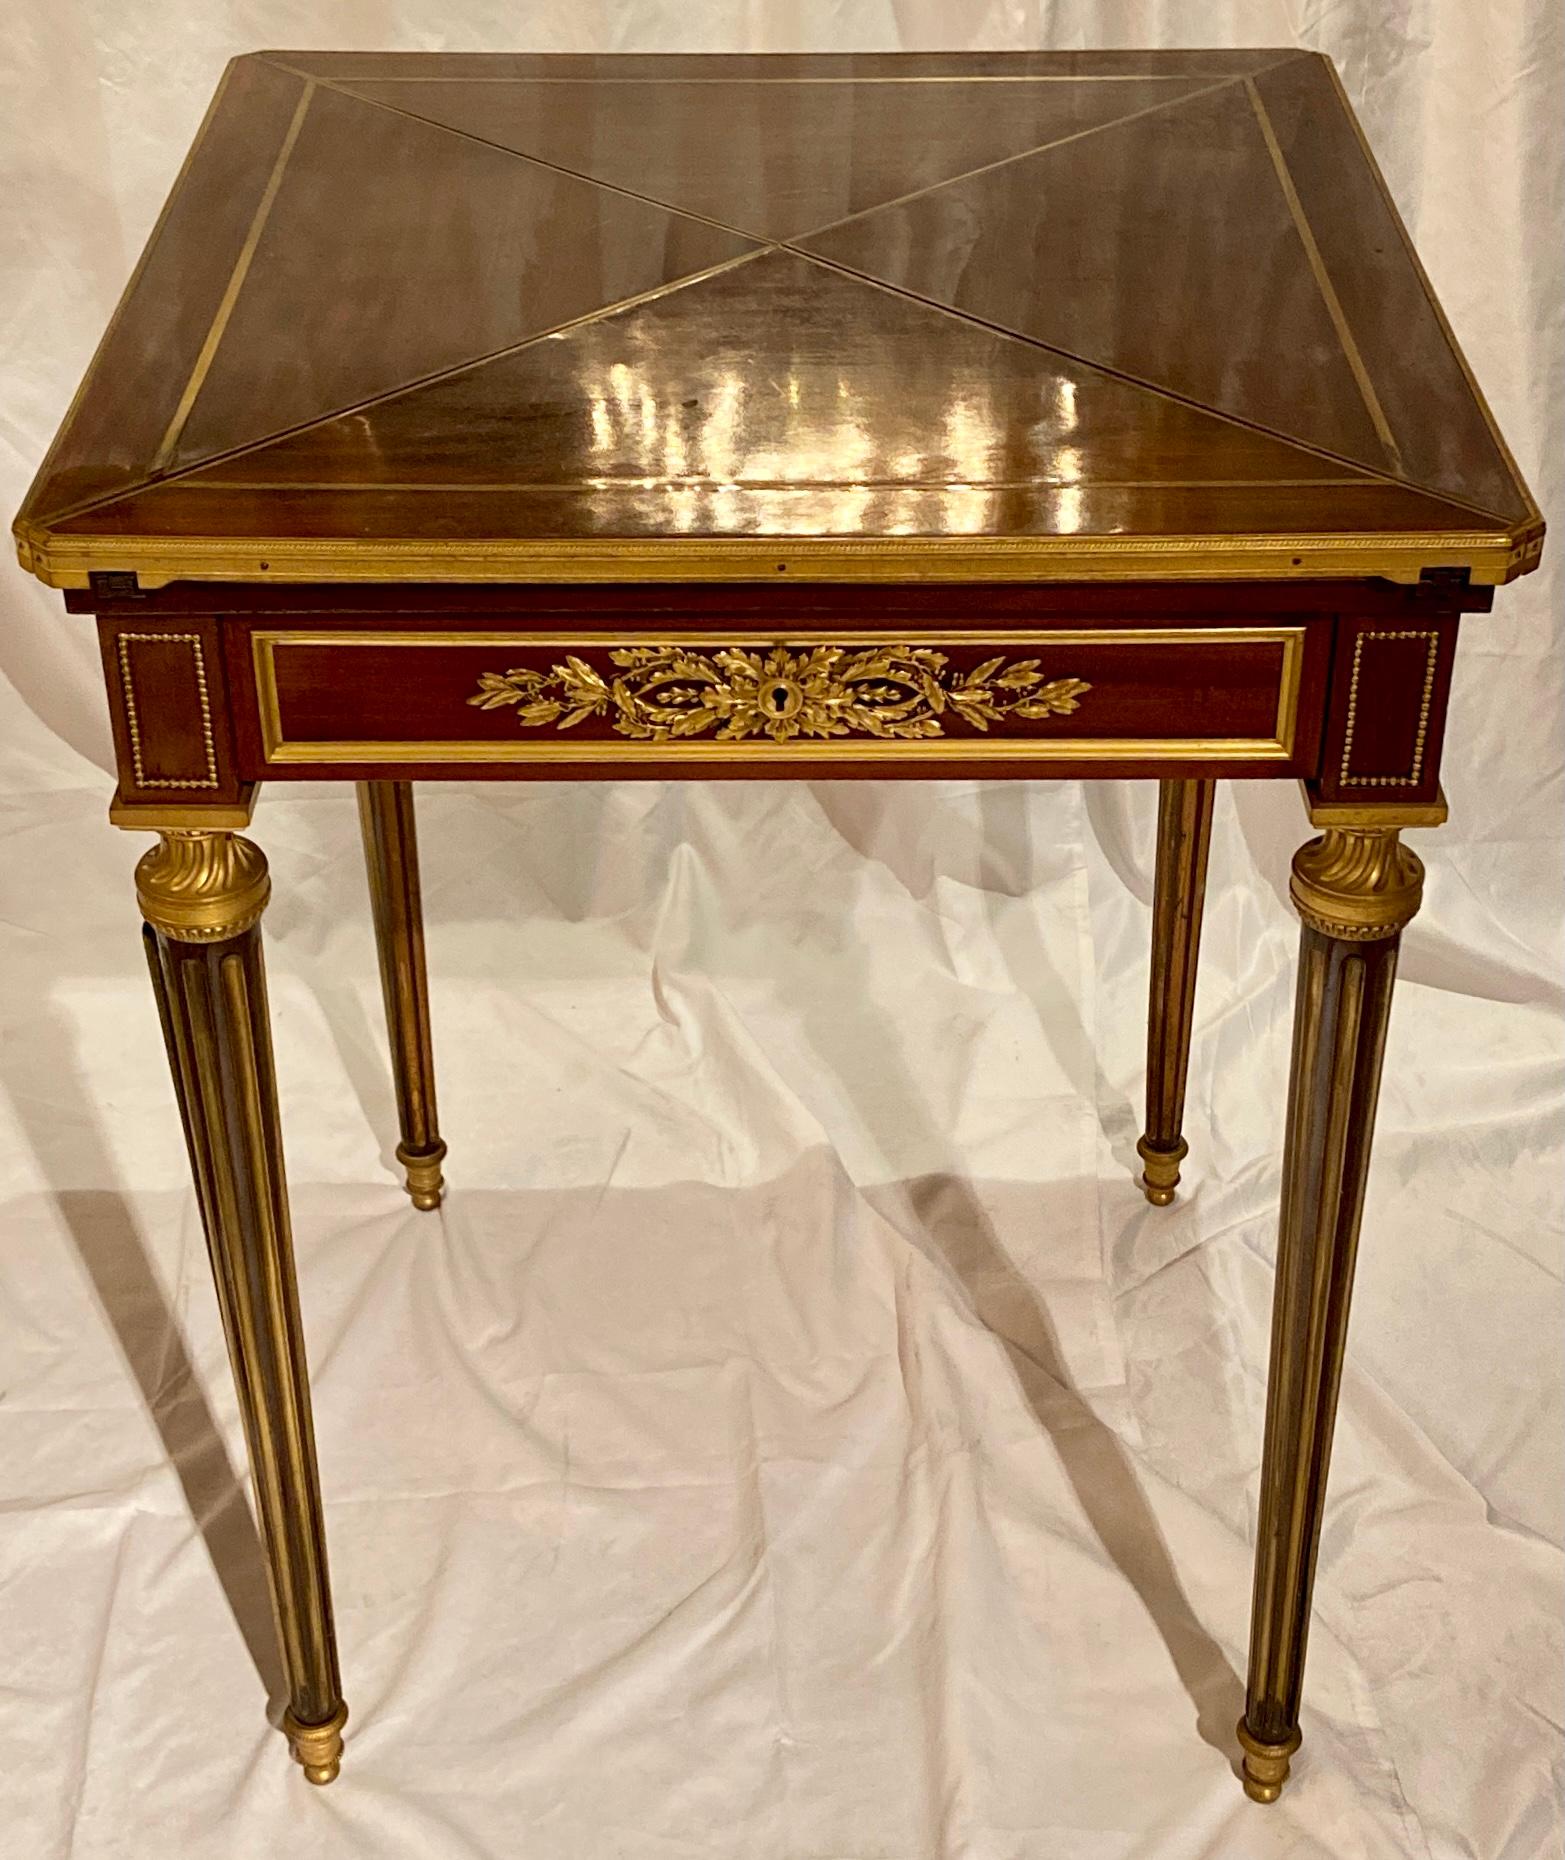 Antique French mahogany and ormolu handkerchief card table signed by Cabinetmaker Paul Sormani, circa 1870.
23